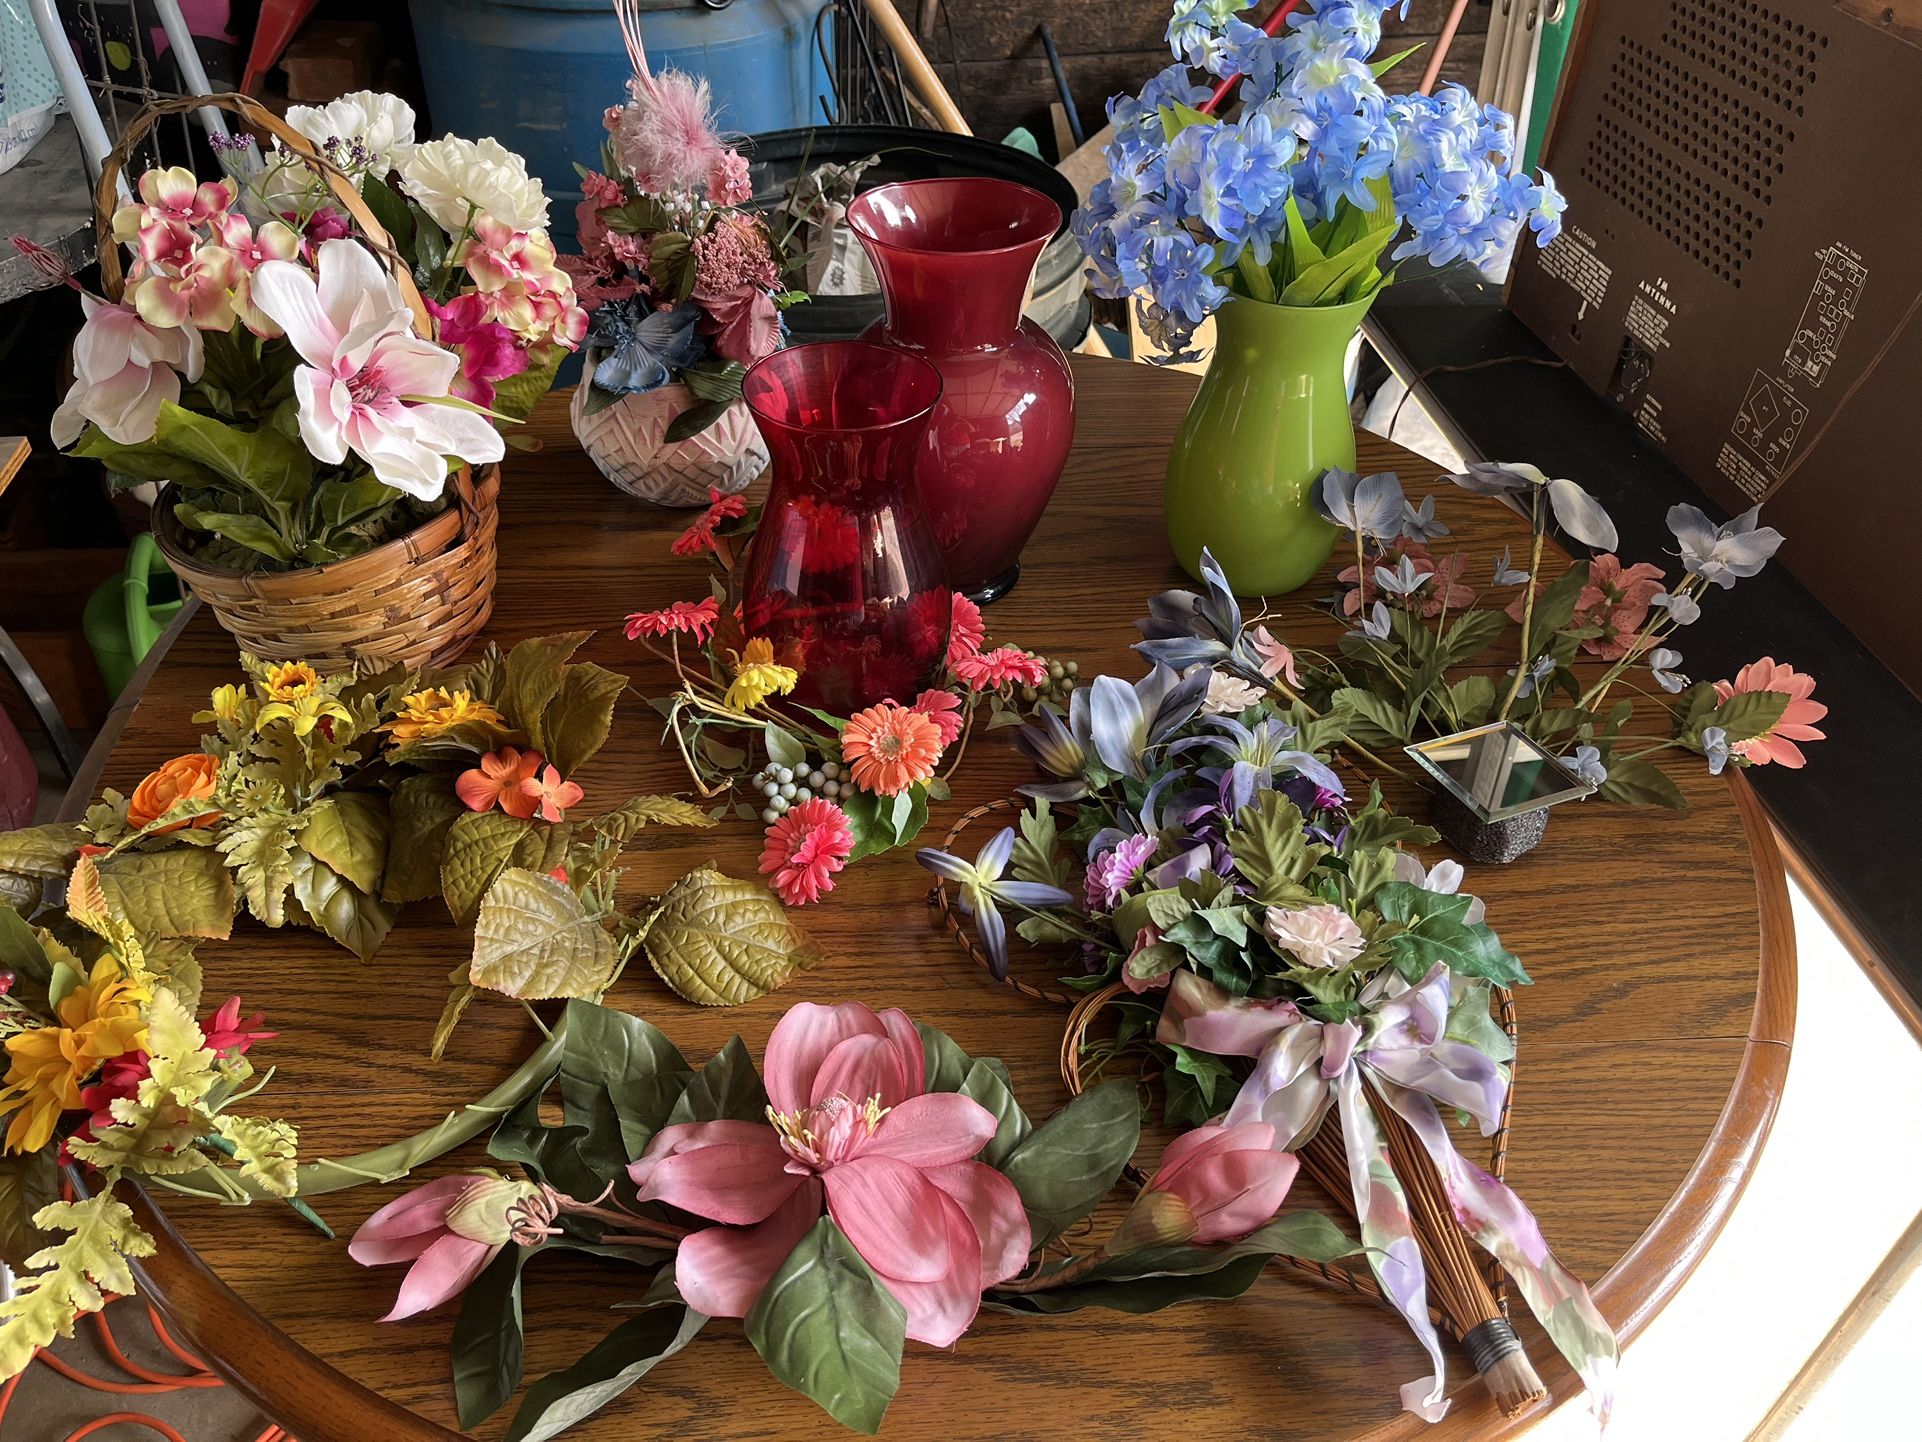 Assorted Dry Flowers, Vases & Baskets